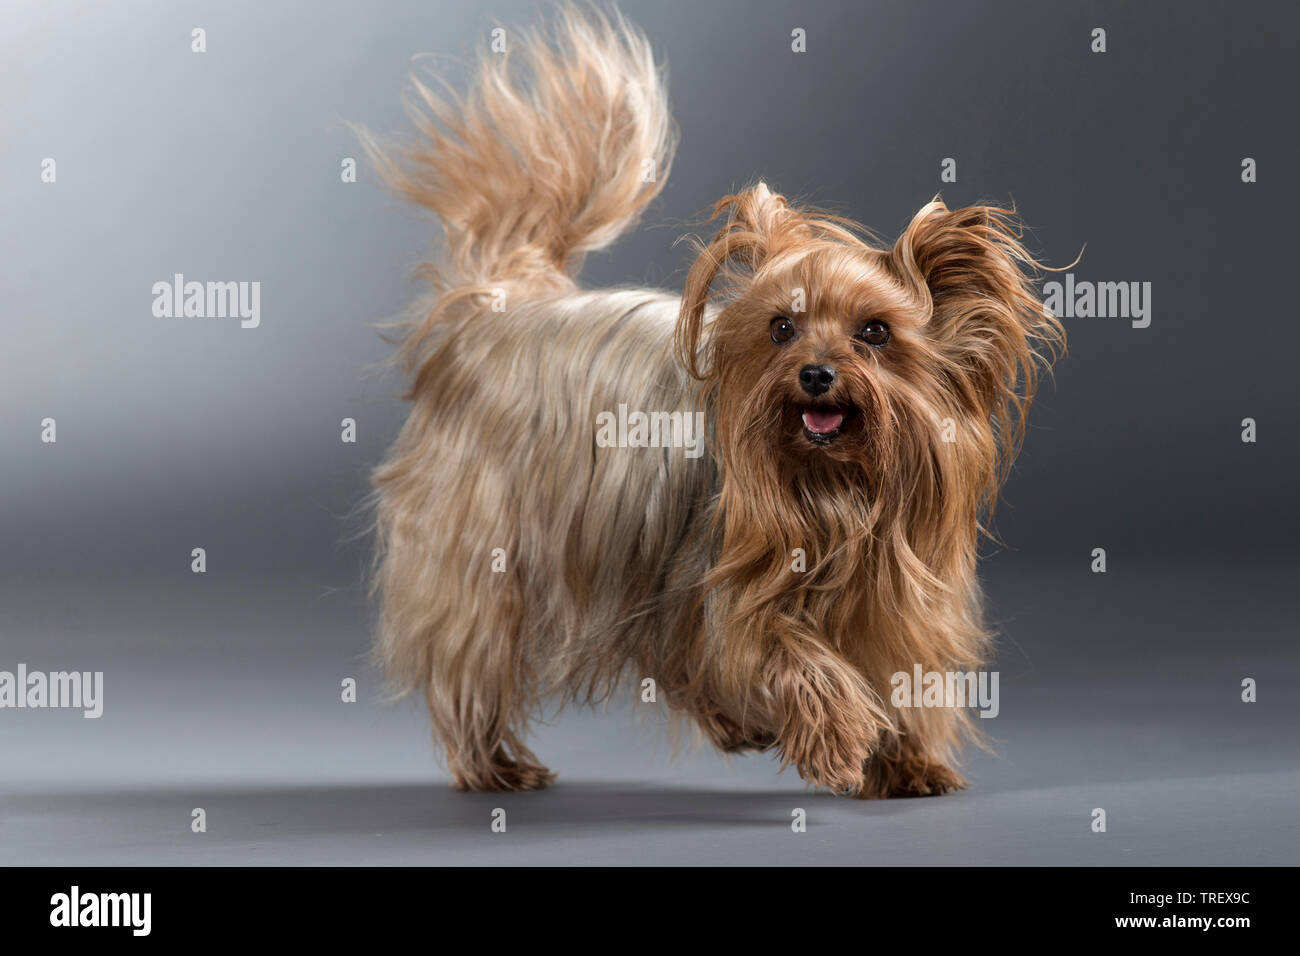 Yorkshire Terrier. Adult dog walking. Studio picture against a gray background. Germany Stock Photo